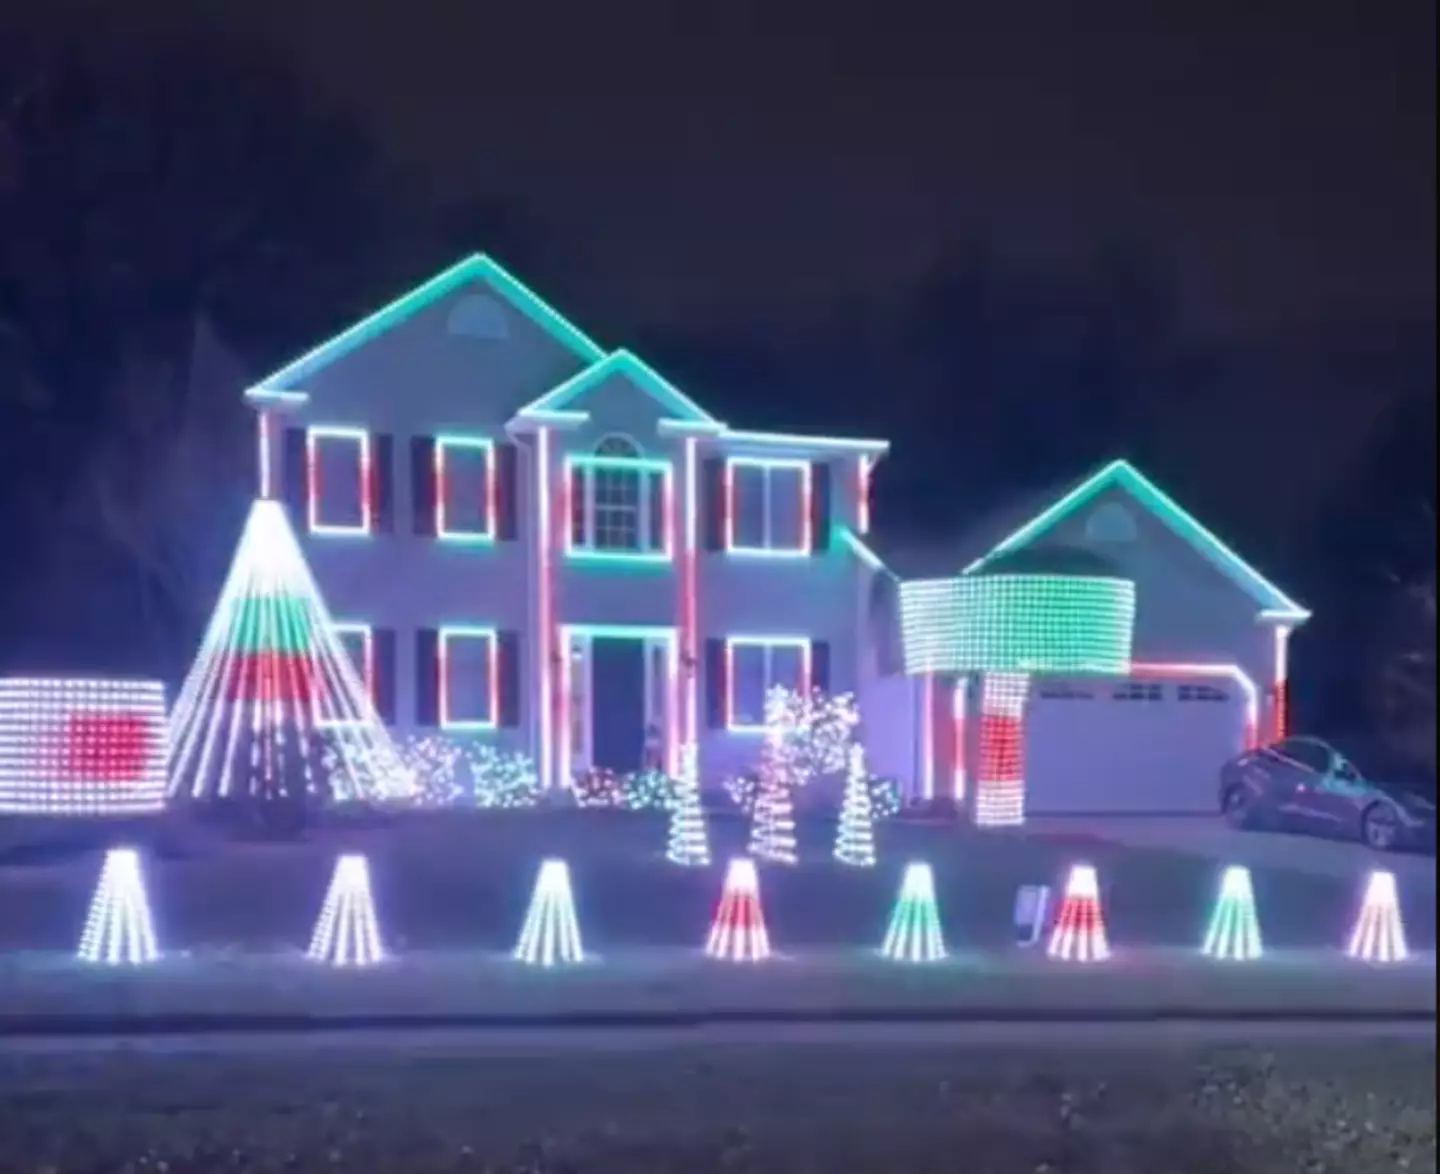 One video on TikTok went viral as it showed just how impressive a Christmas display can be.